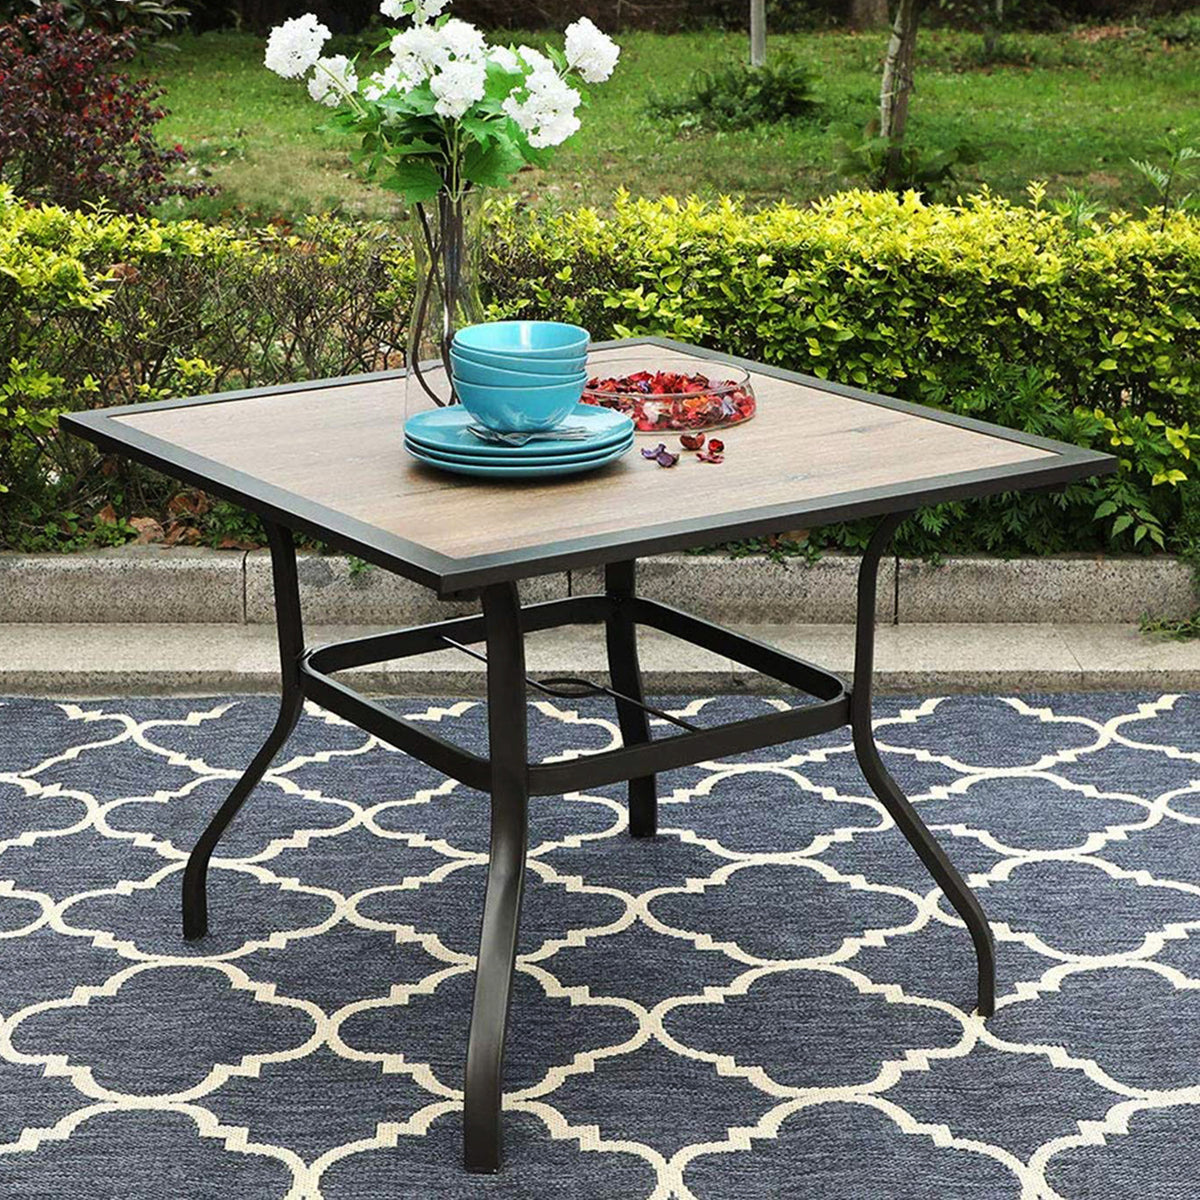 Sophia & William Black Frame Outdoor Dining Table with Umbrella Hole